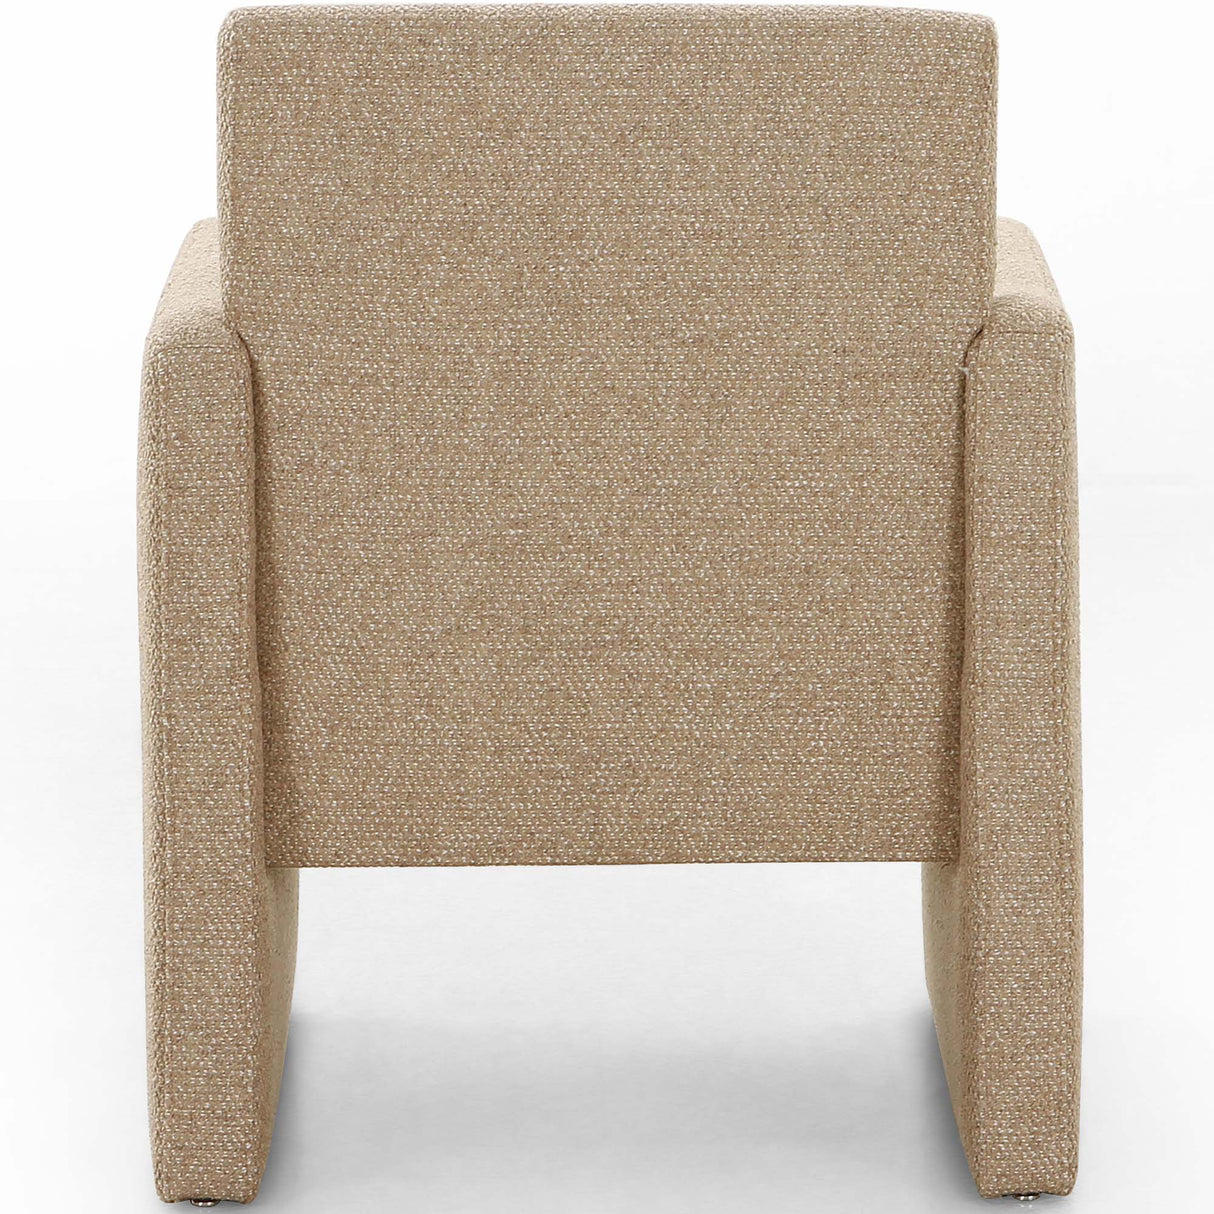 Four Hands Kima Dining Chair Upholstered Dining Chair